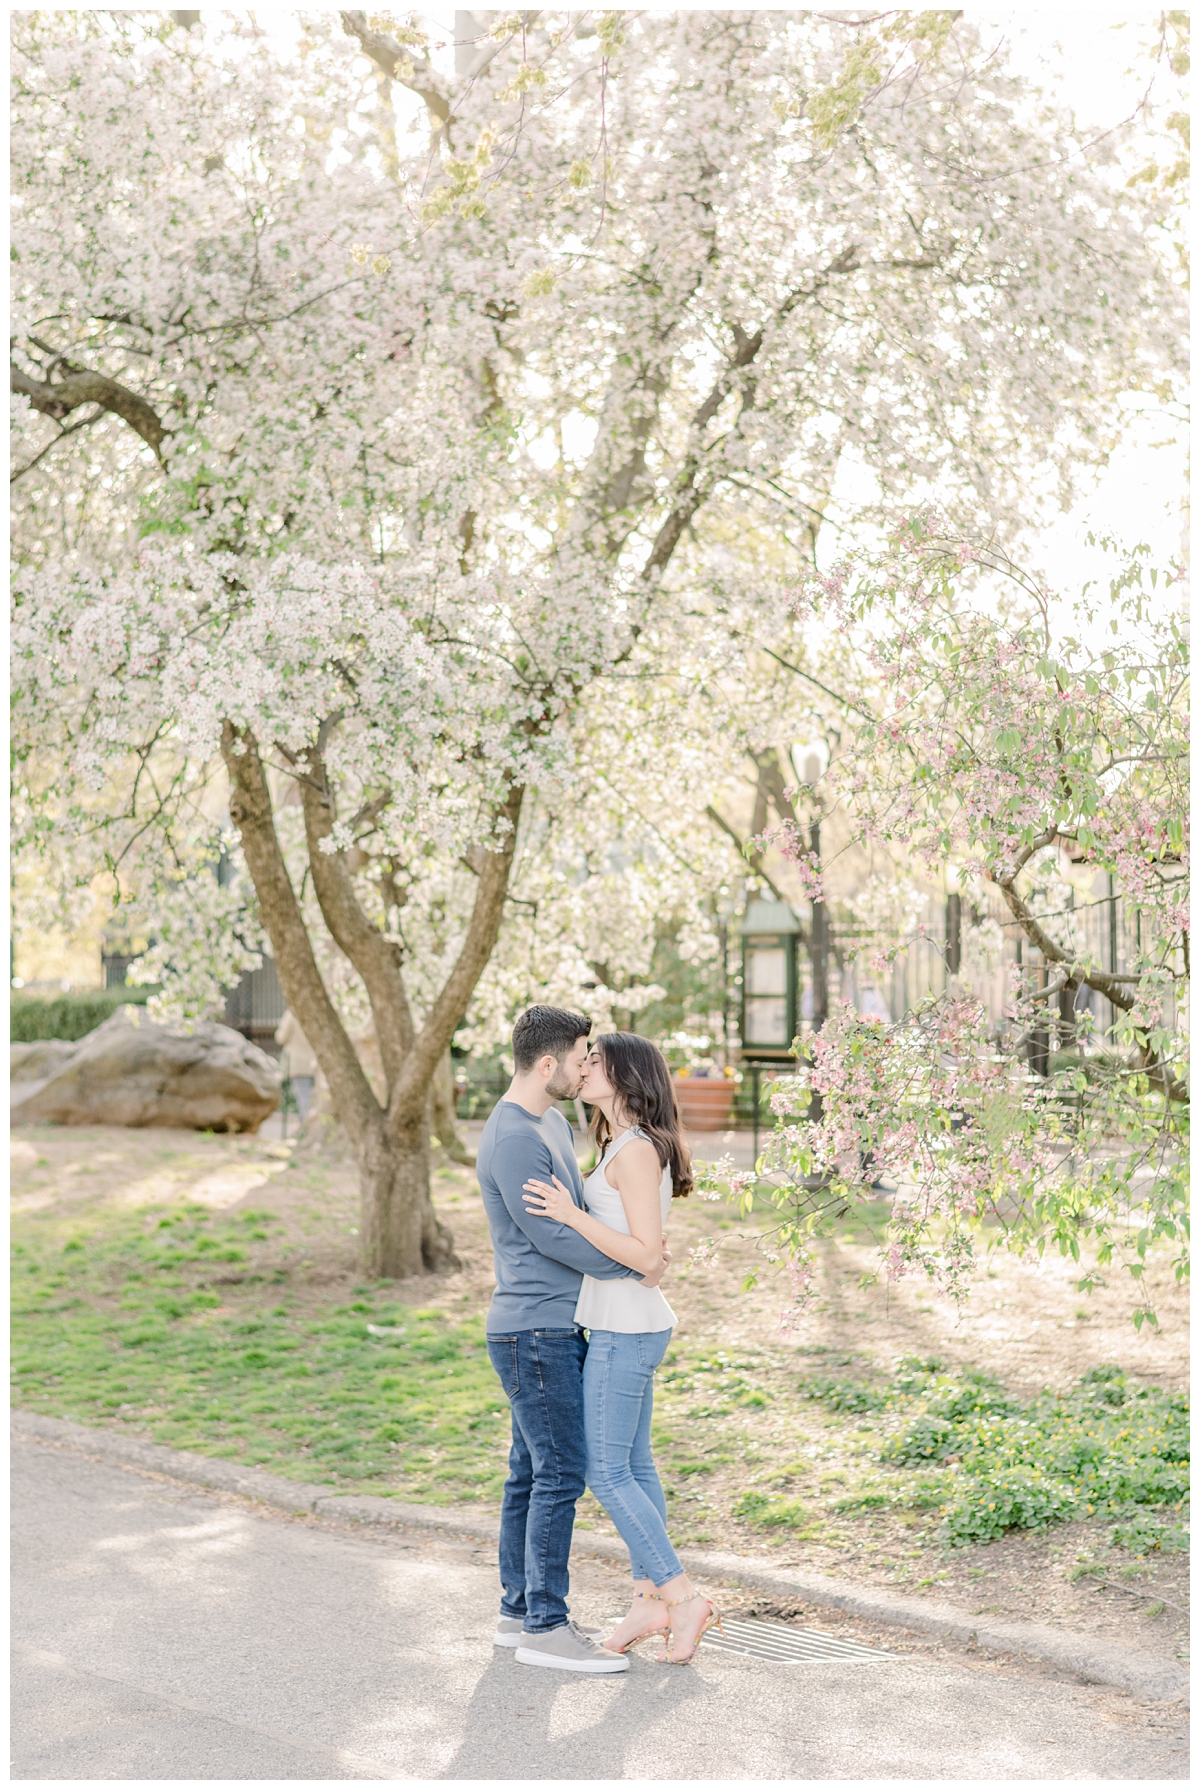 Central Park, NYC Engagement Photo Session